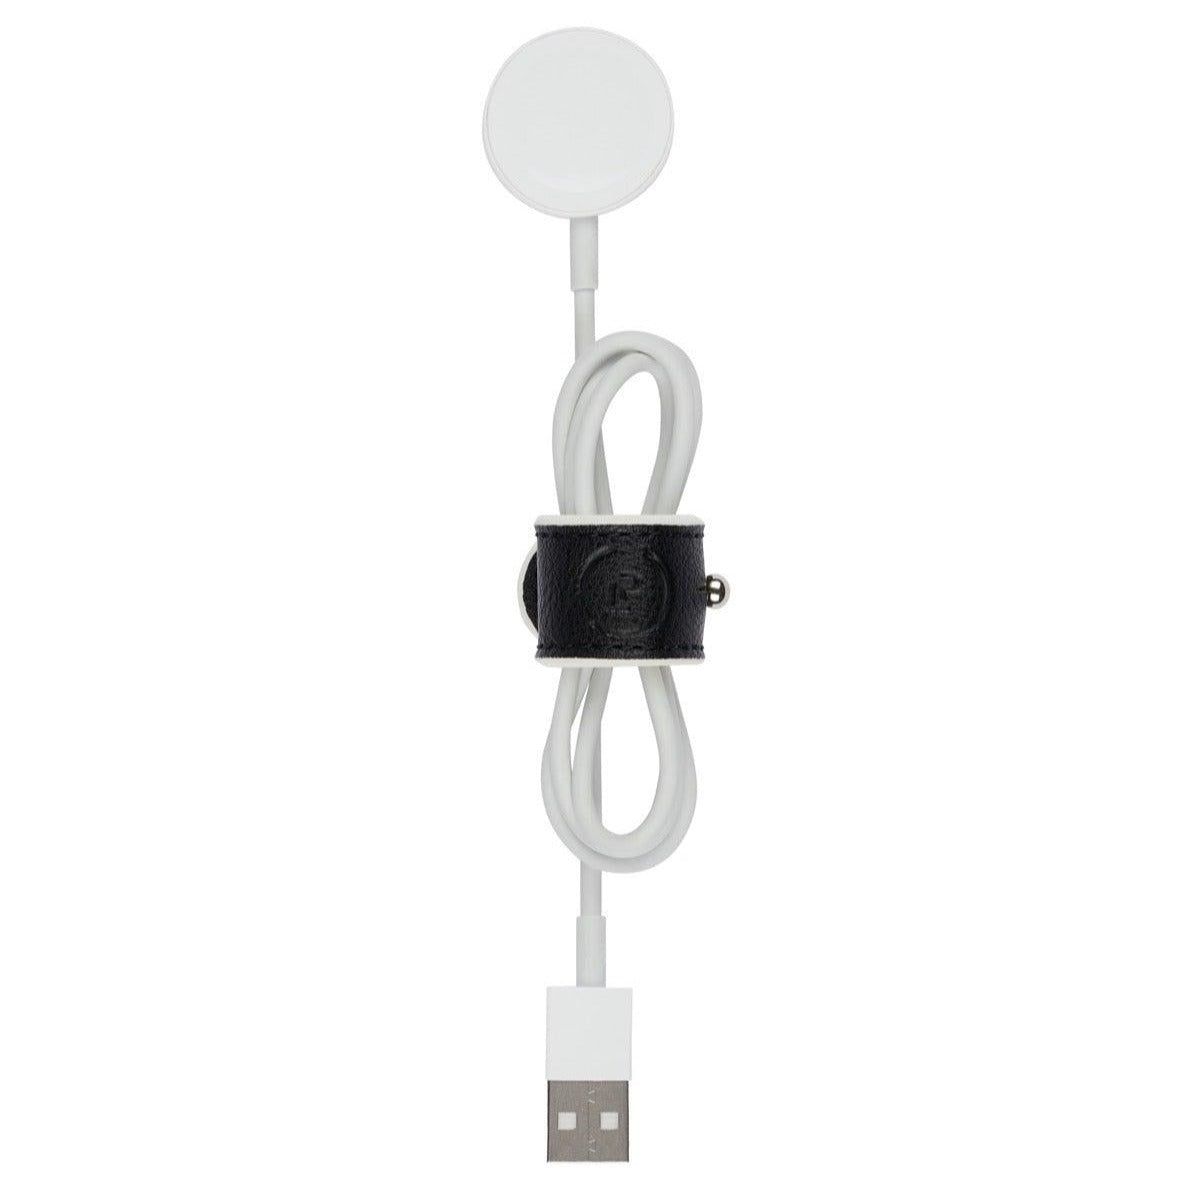 Cable Tidy in Ink White colourway secured around charging wire